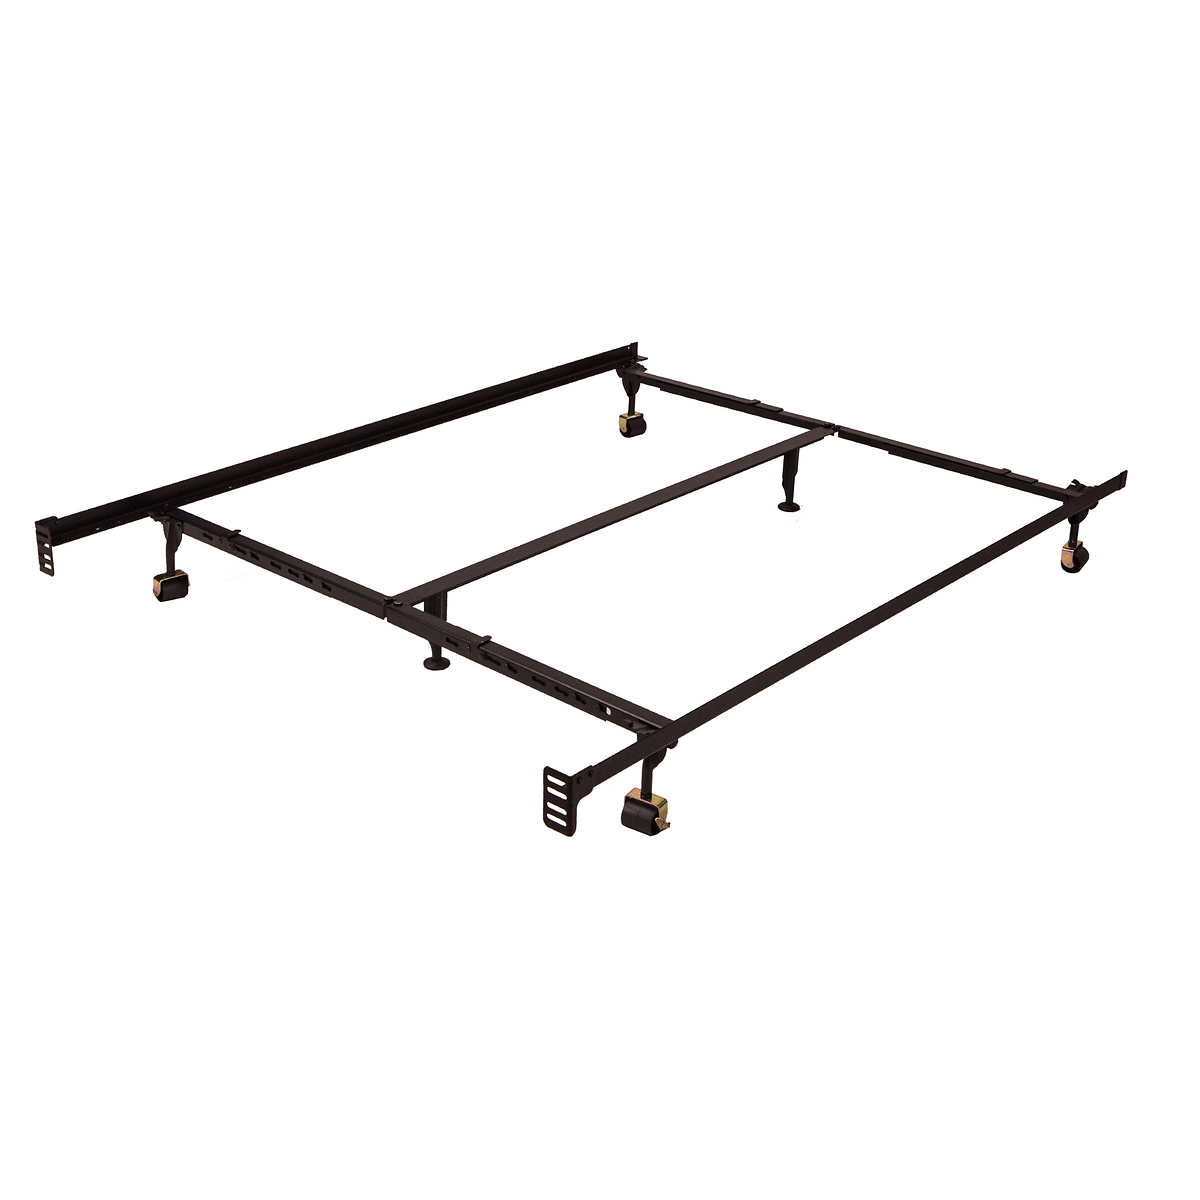 Premium Universal Lev R Lock Bed Frame, How To Put Together A King Size Metal Bed Frame